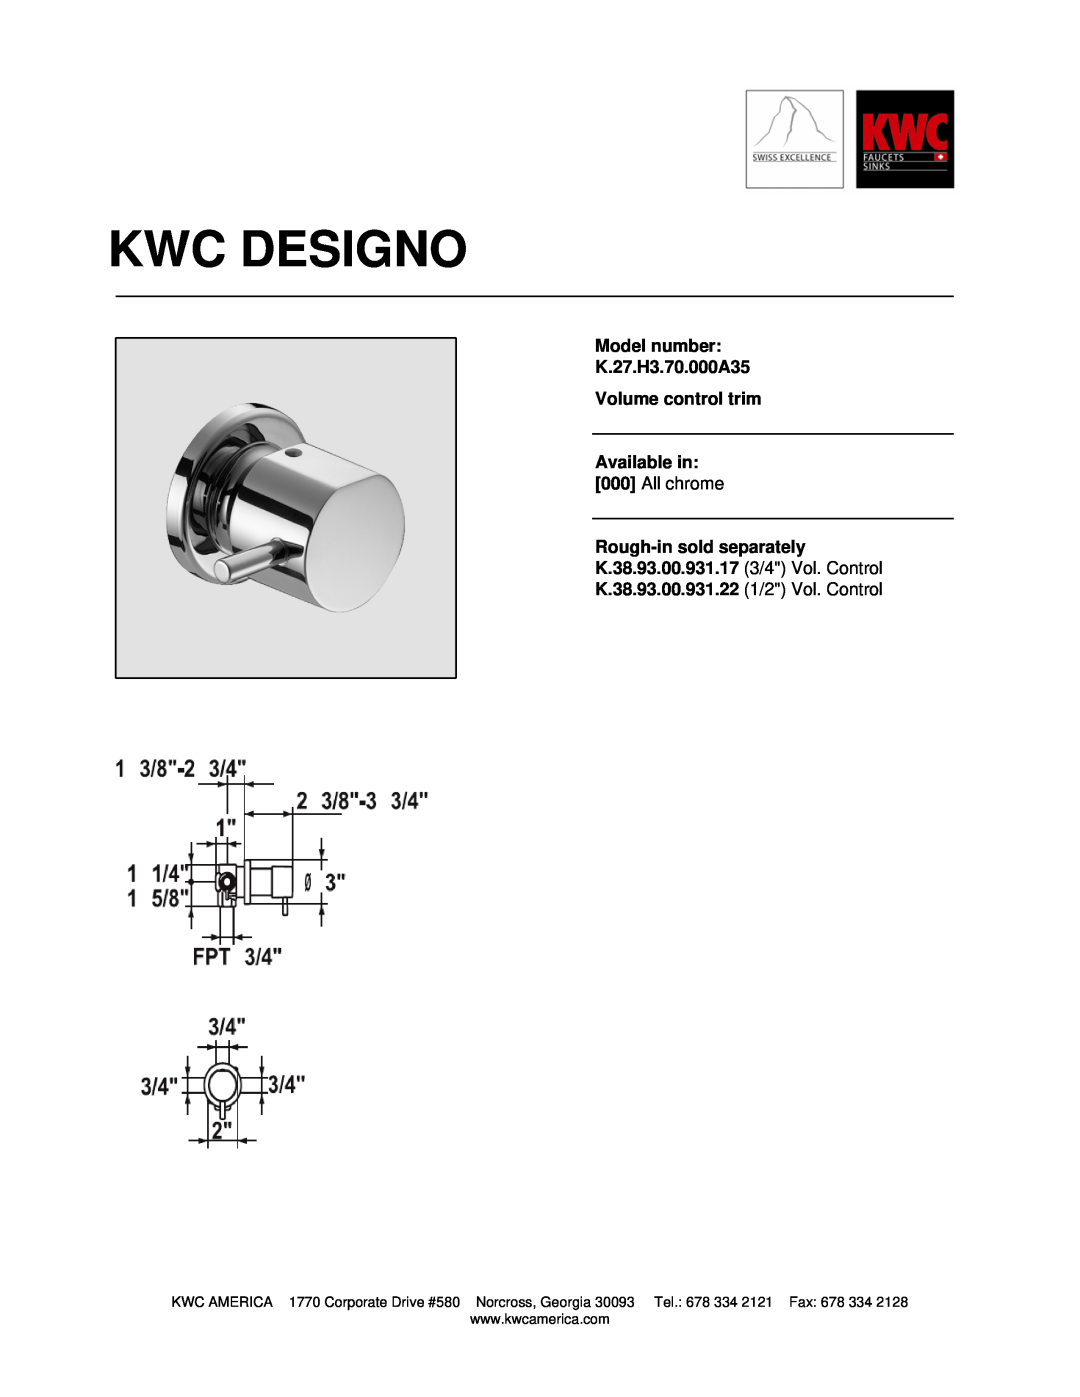 KWC manual Kwc Designo, Model number K.27.H3.70.000A35, Volume control trim Available in 000 All chrome 